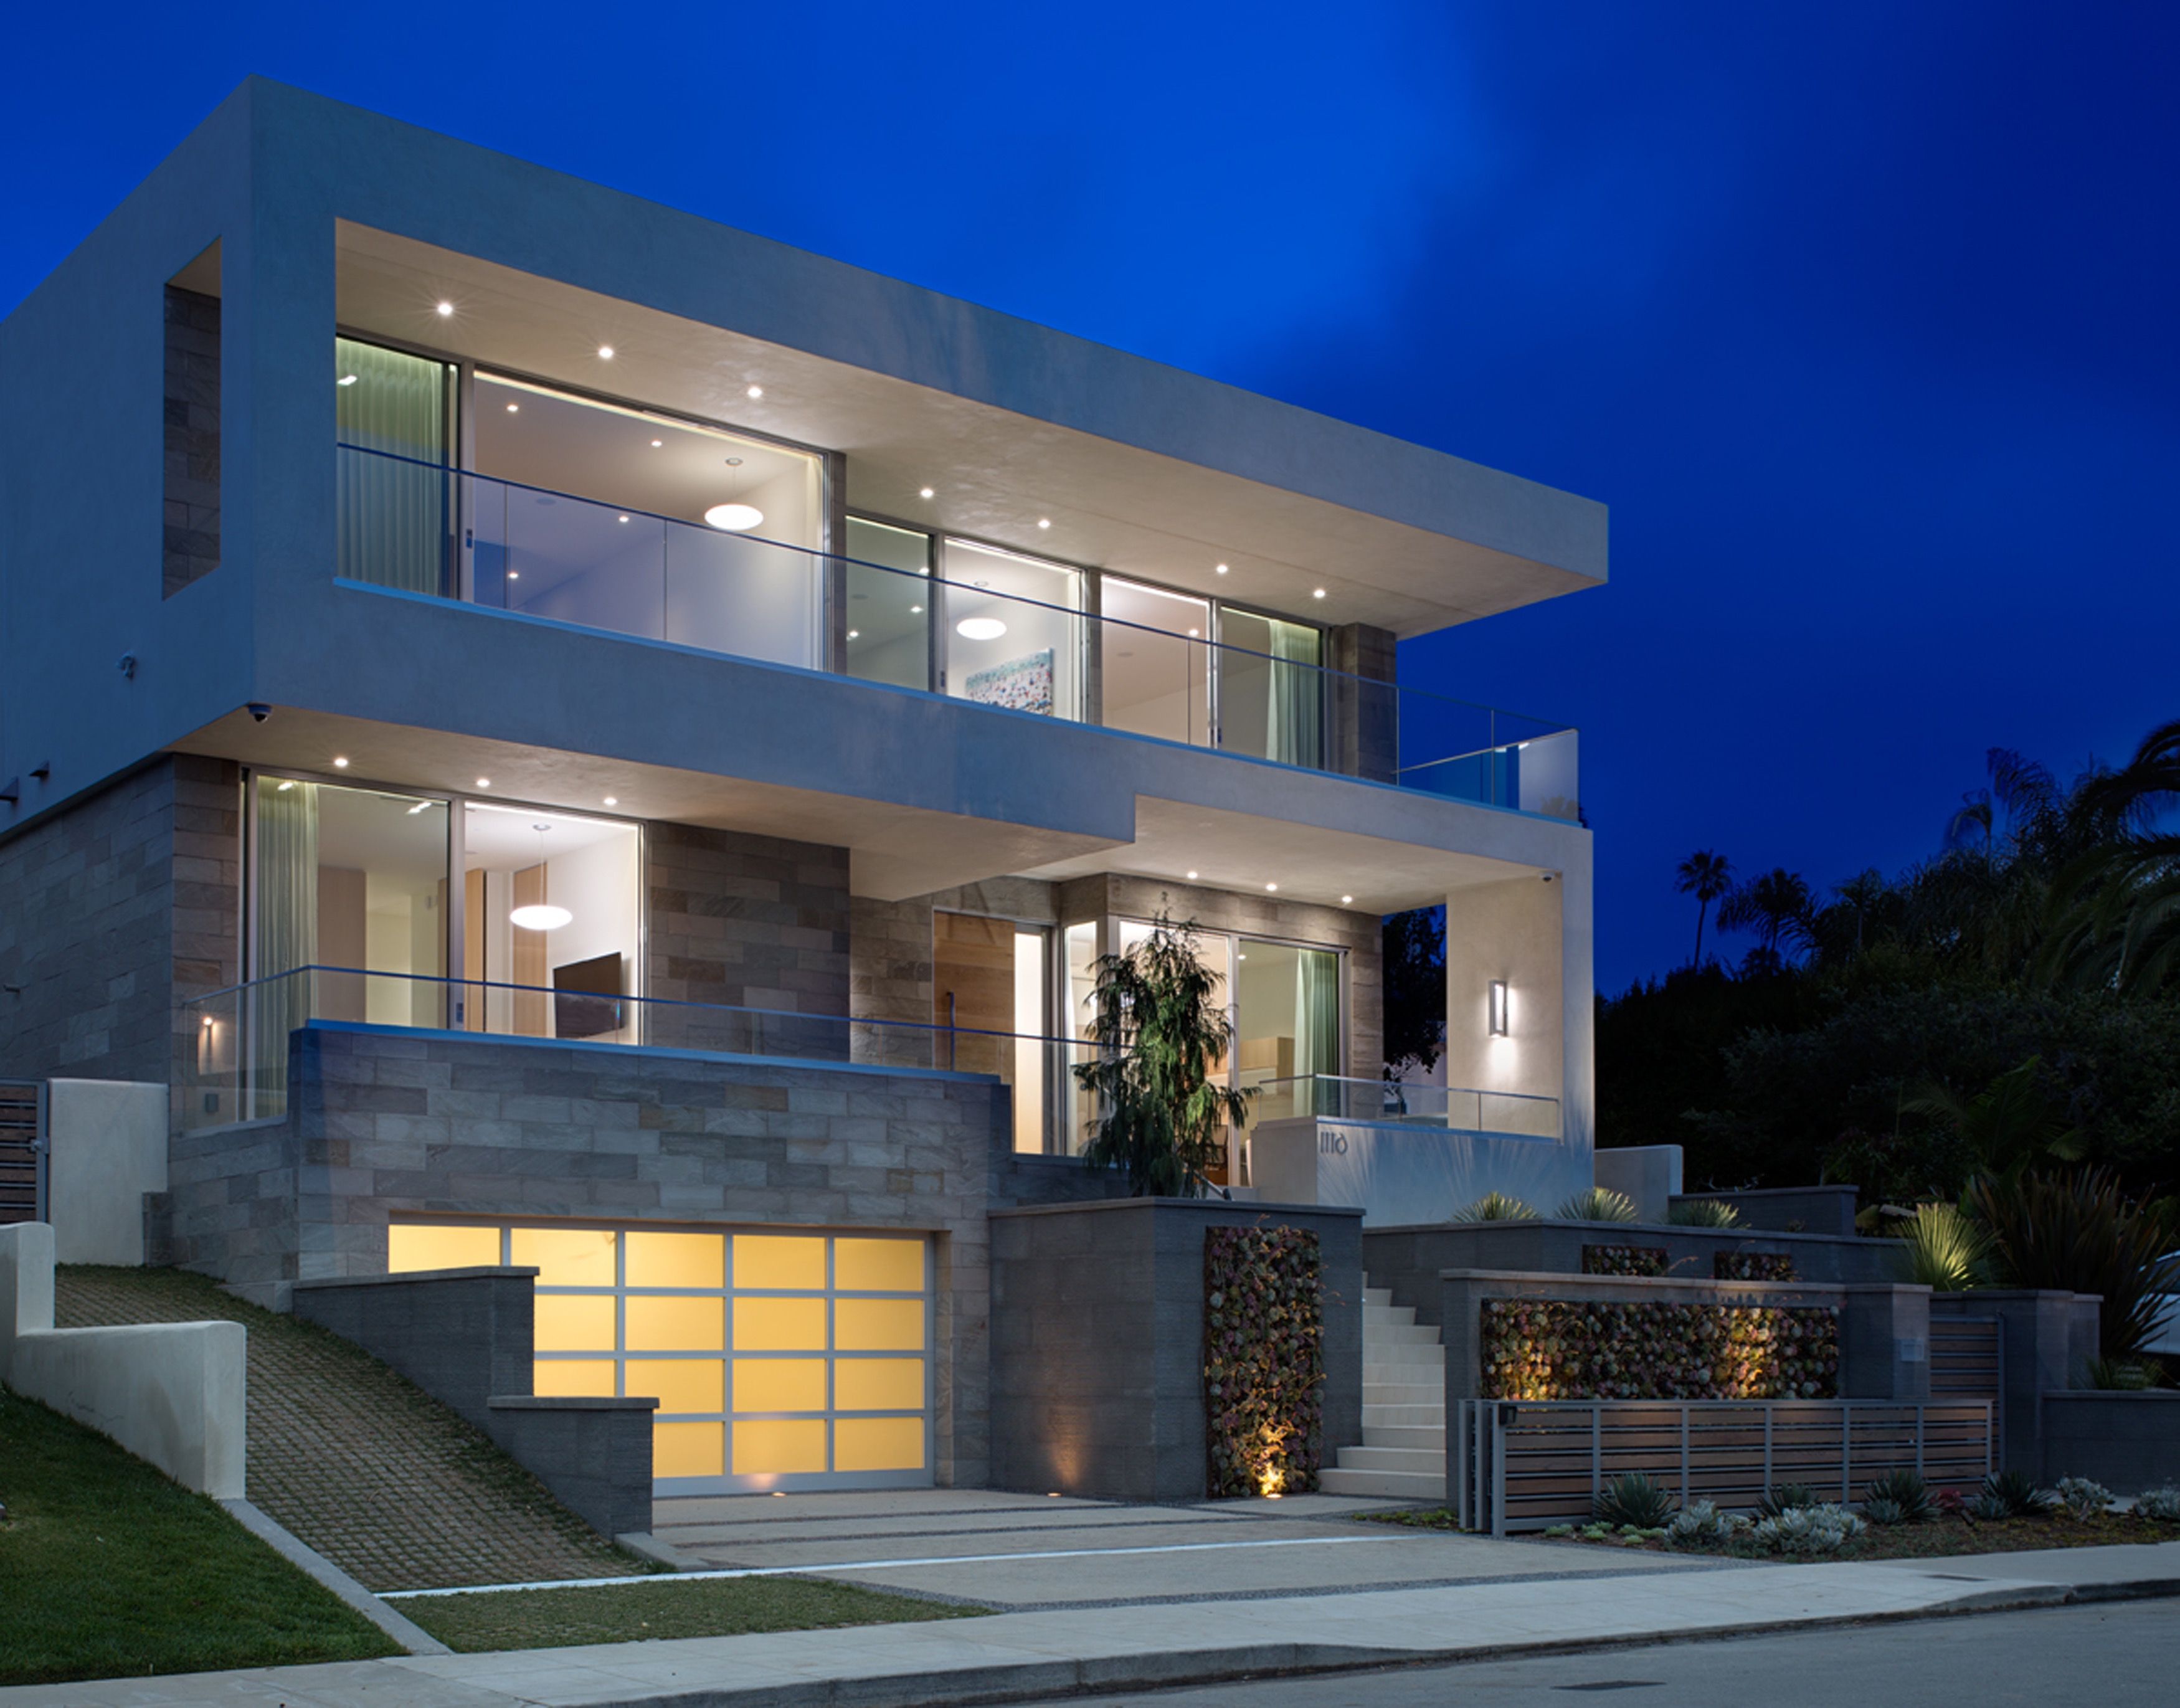 Wonderful Modern House Landscaping Design With Stone And Concrete Facade (View 21 of 33)